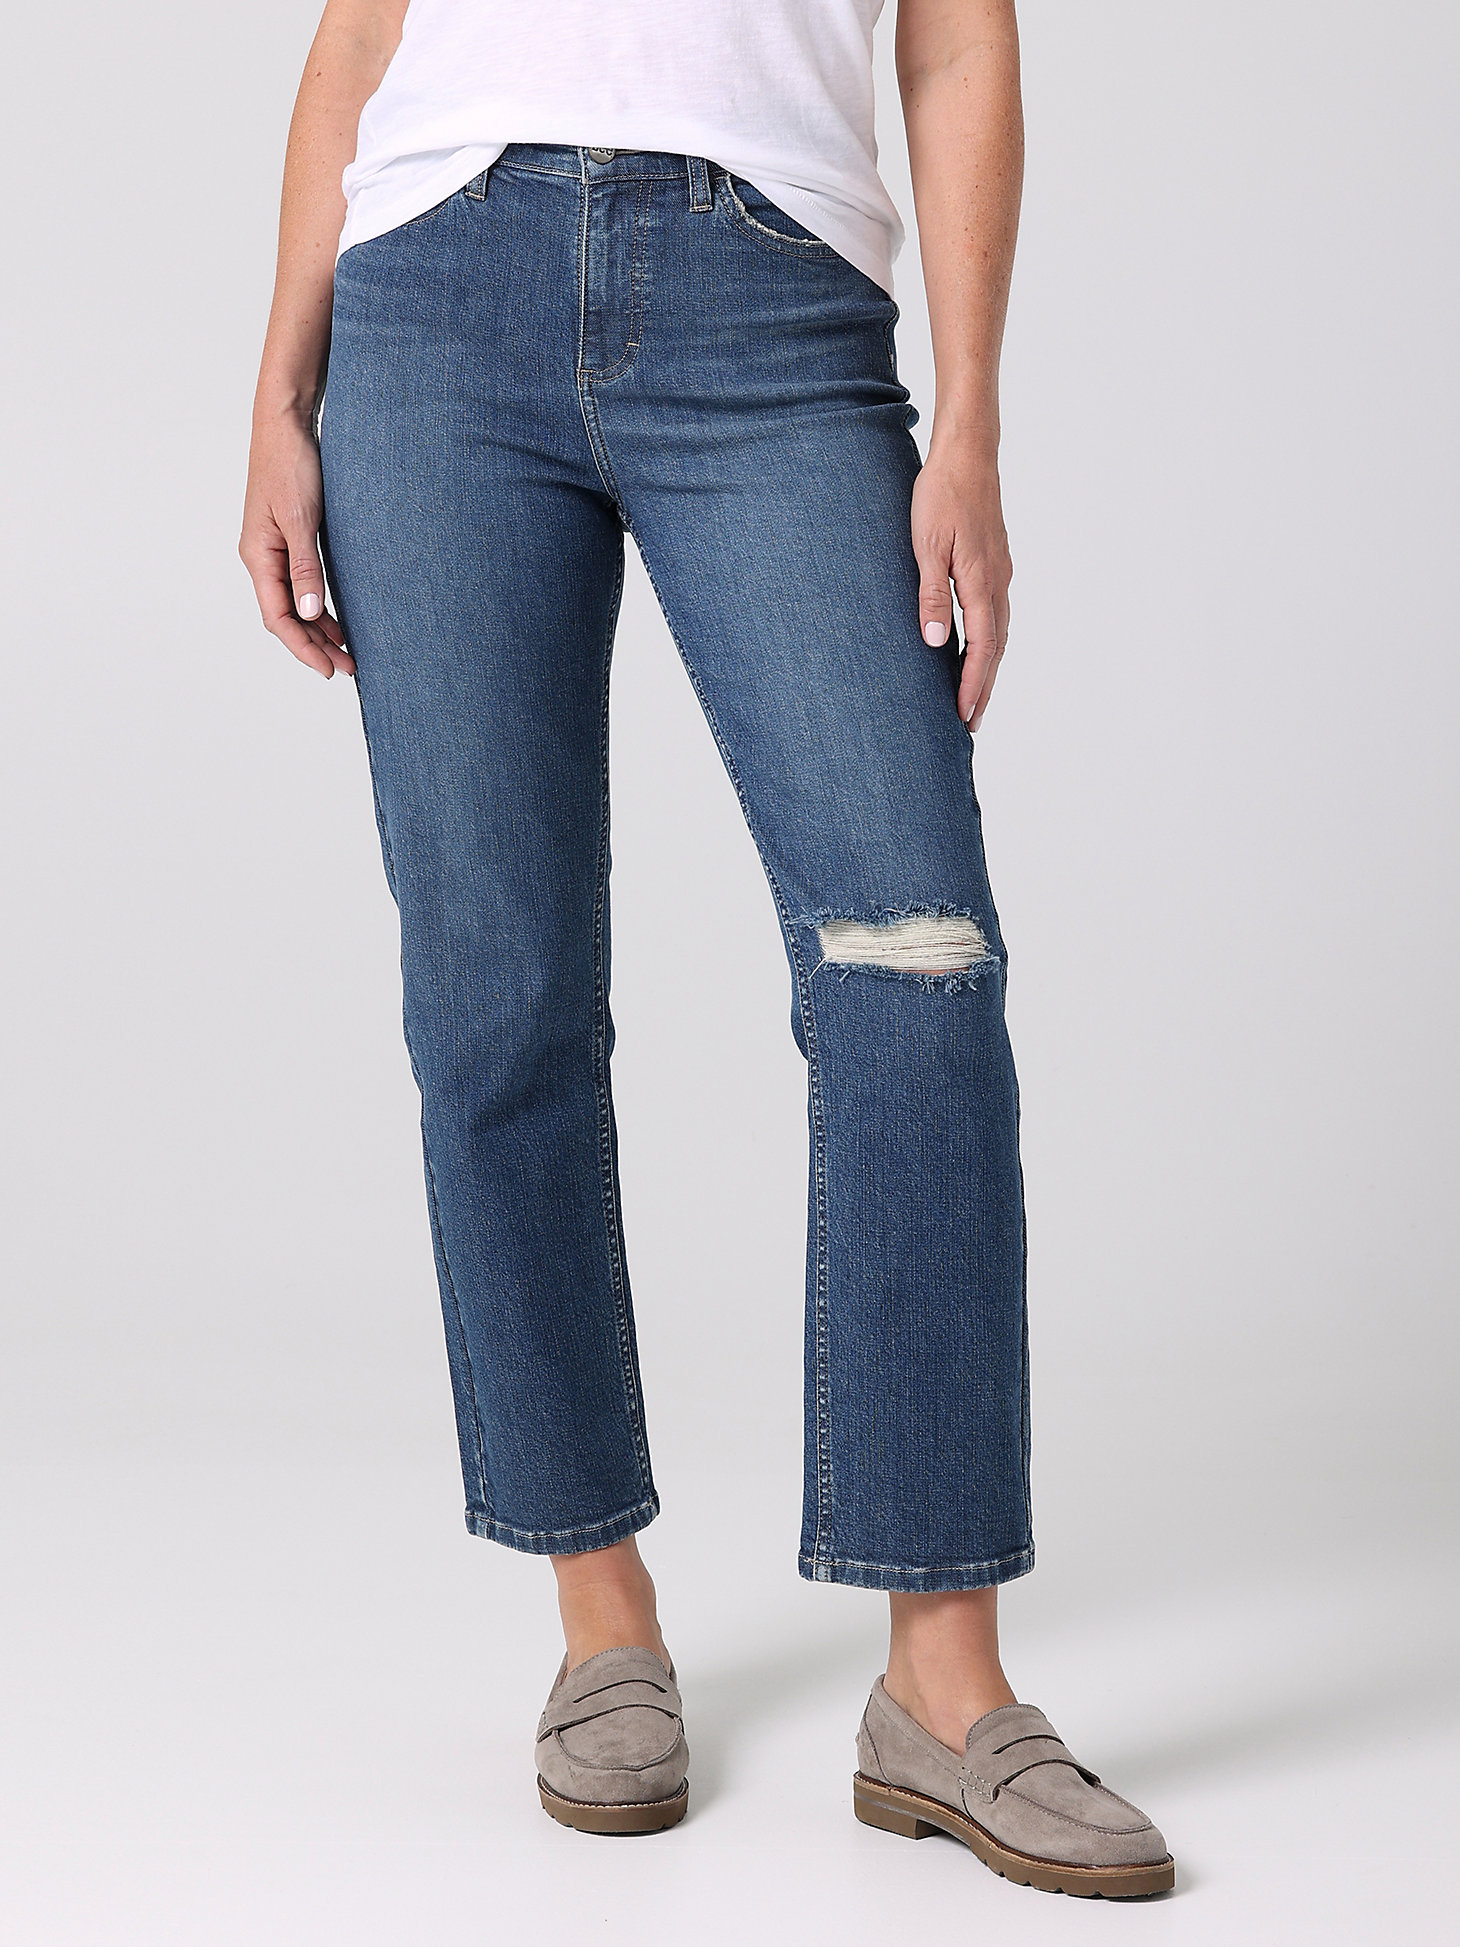 Women's Legendary High Rise Vintage Straight Jean in Everyday main view